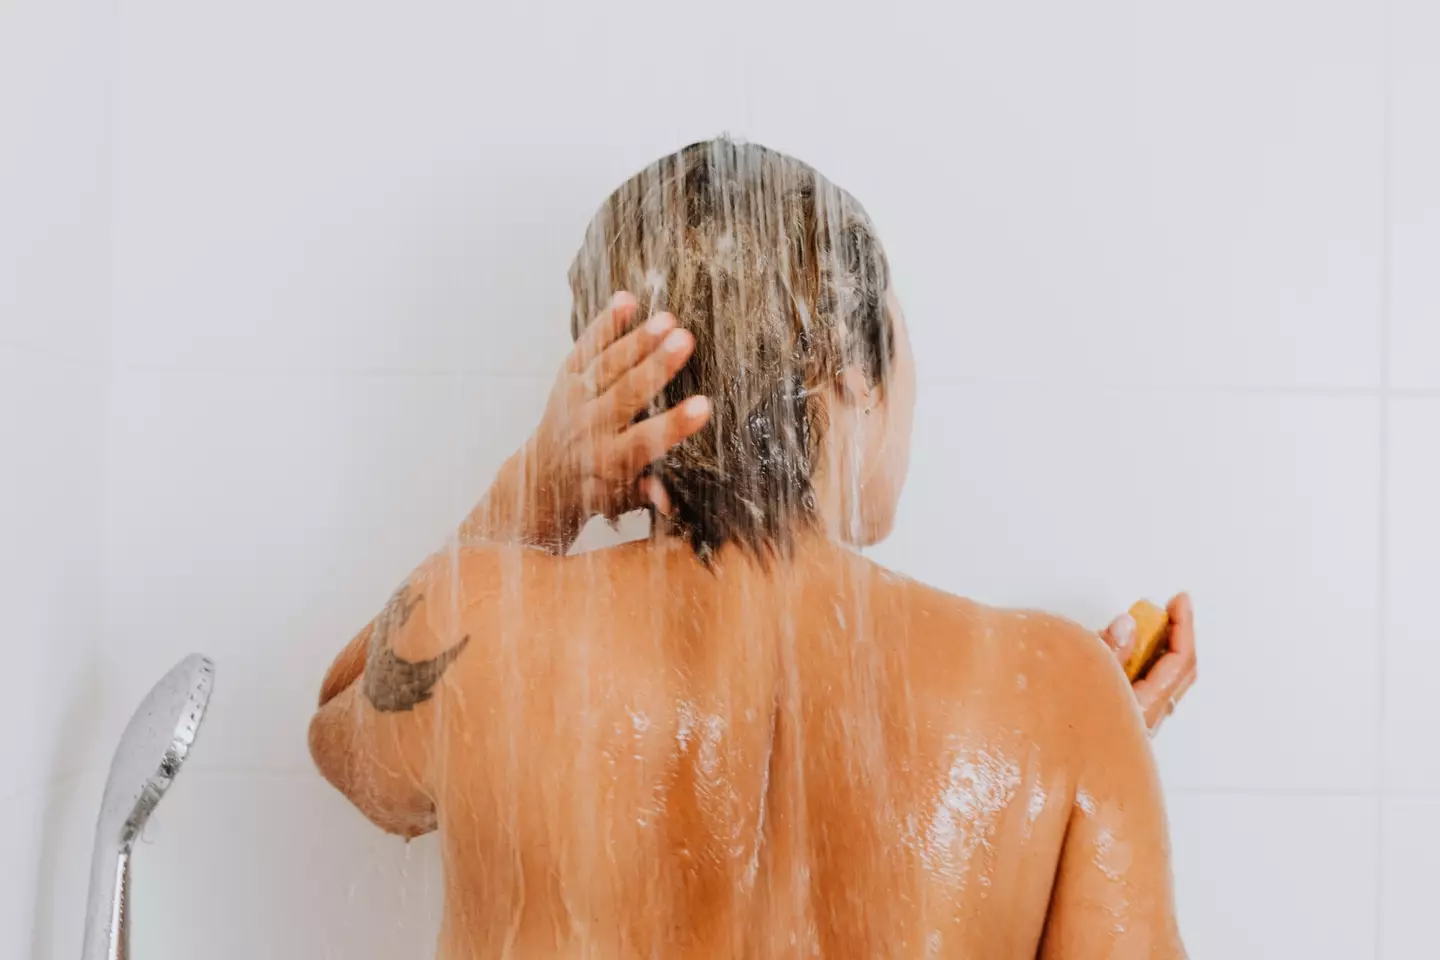 Your daily activities and job impact how often you should shower (